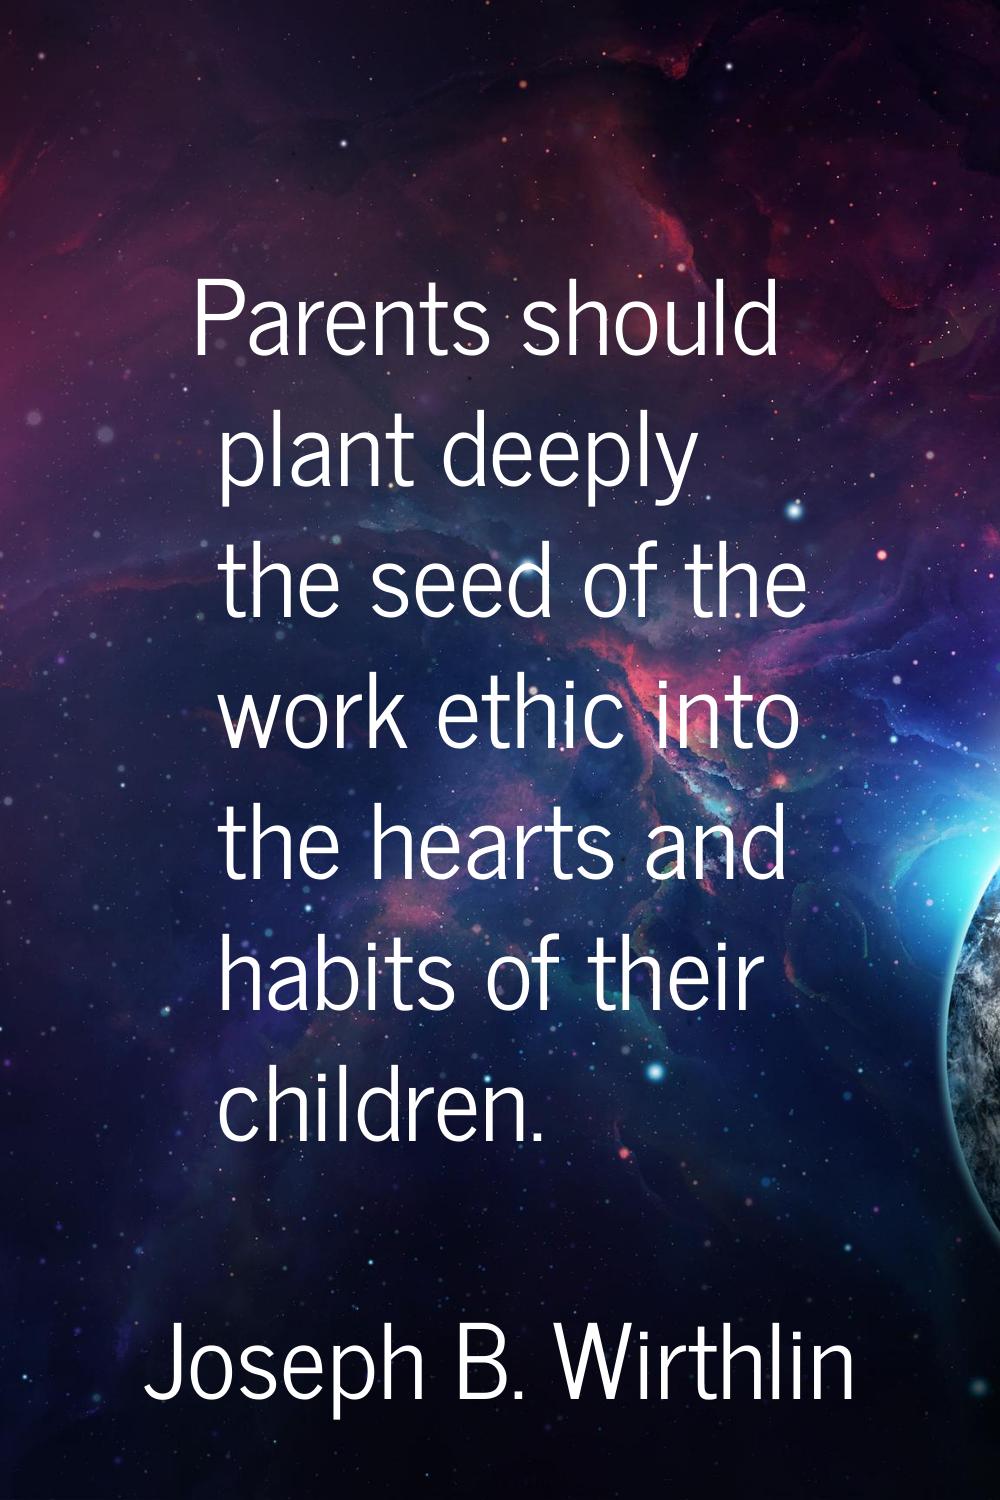 Parents should plant deeply the seed of the work ethic into the hearts and habits of their children